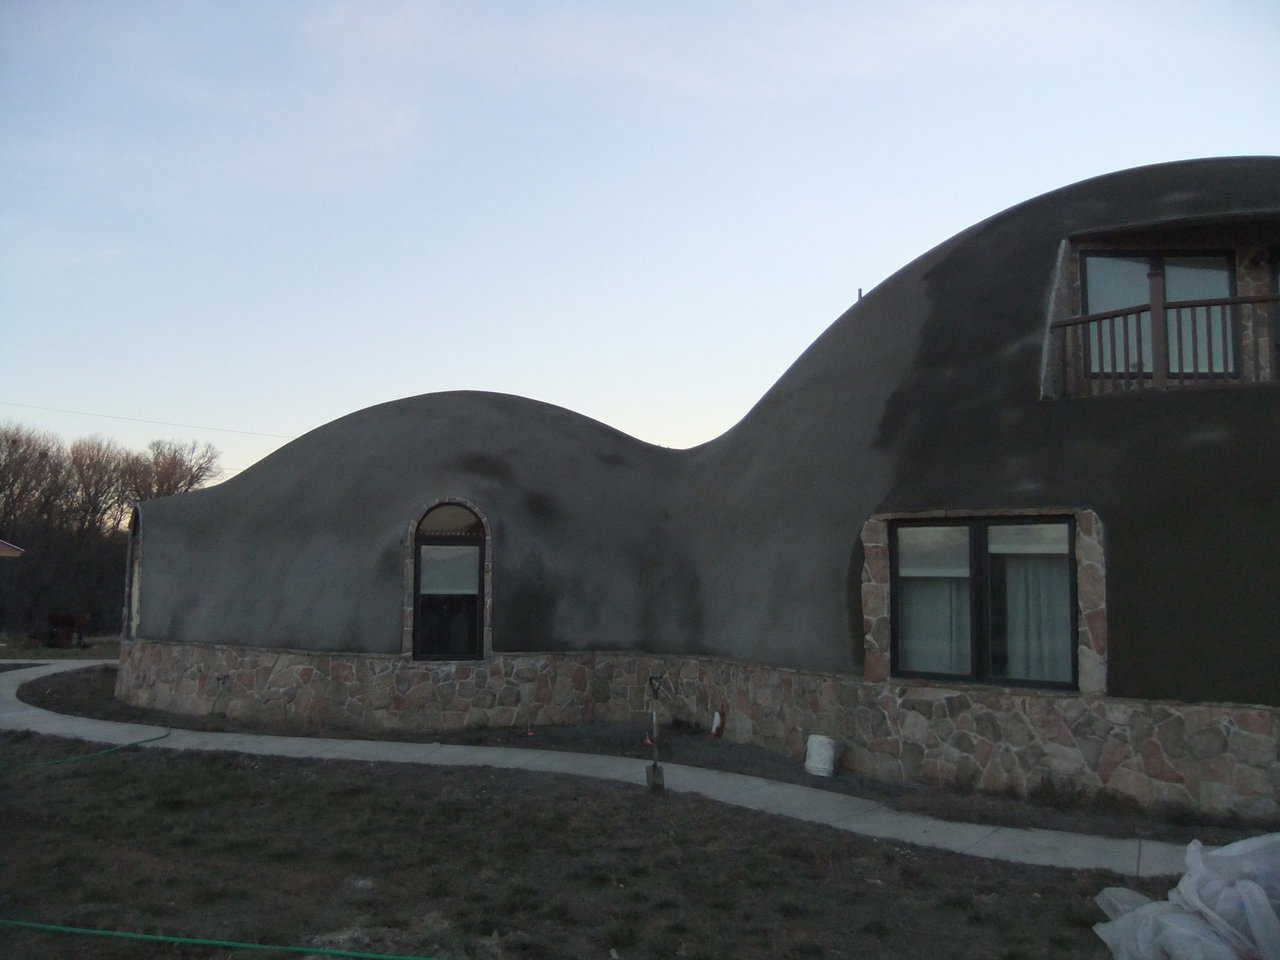 This photo depicts the dome, after the stucco was applied.